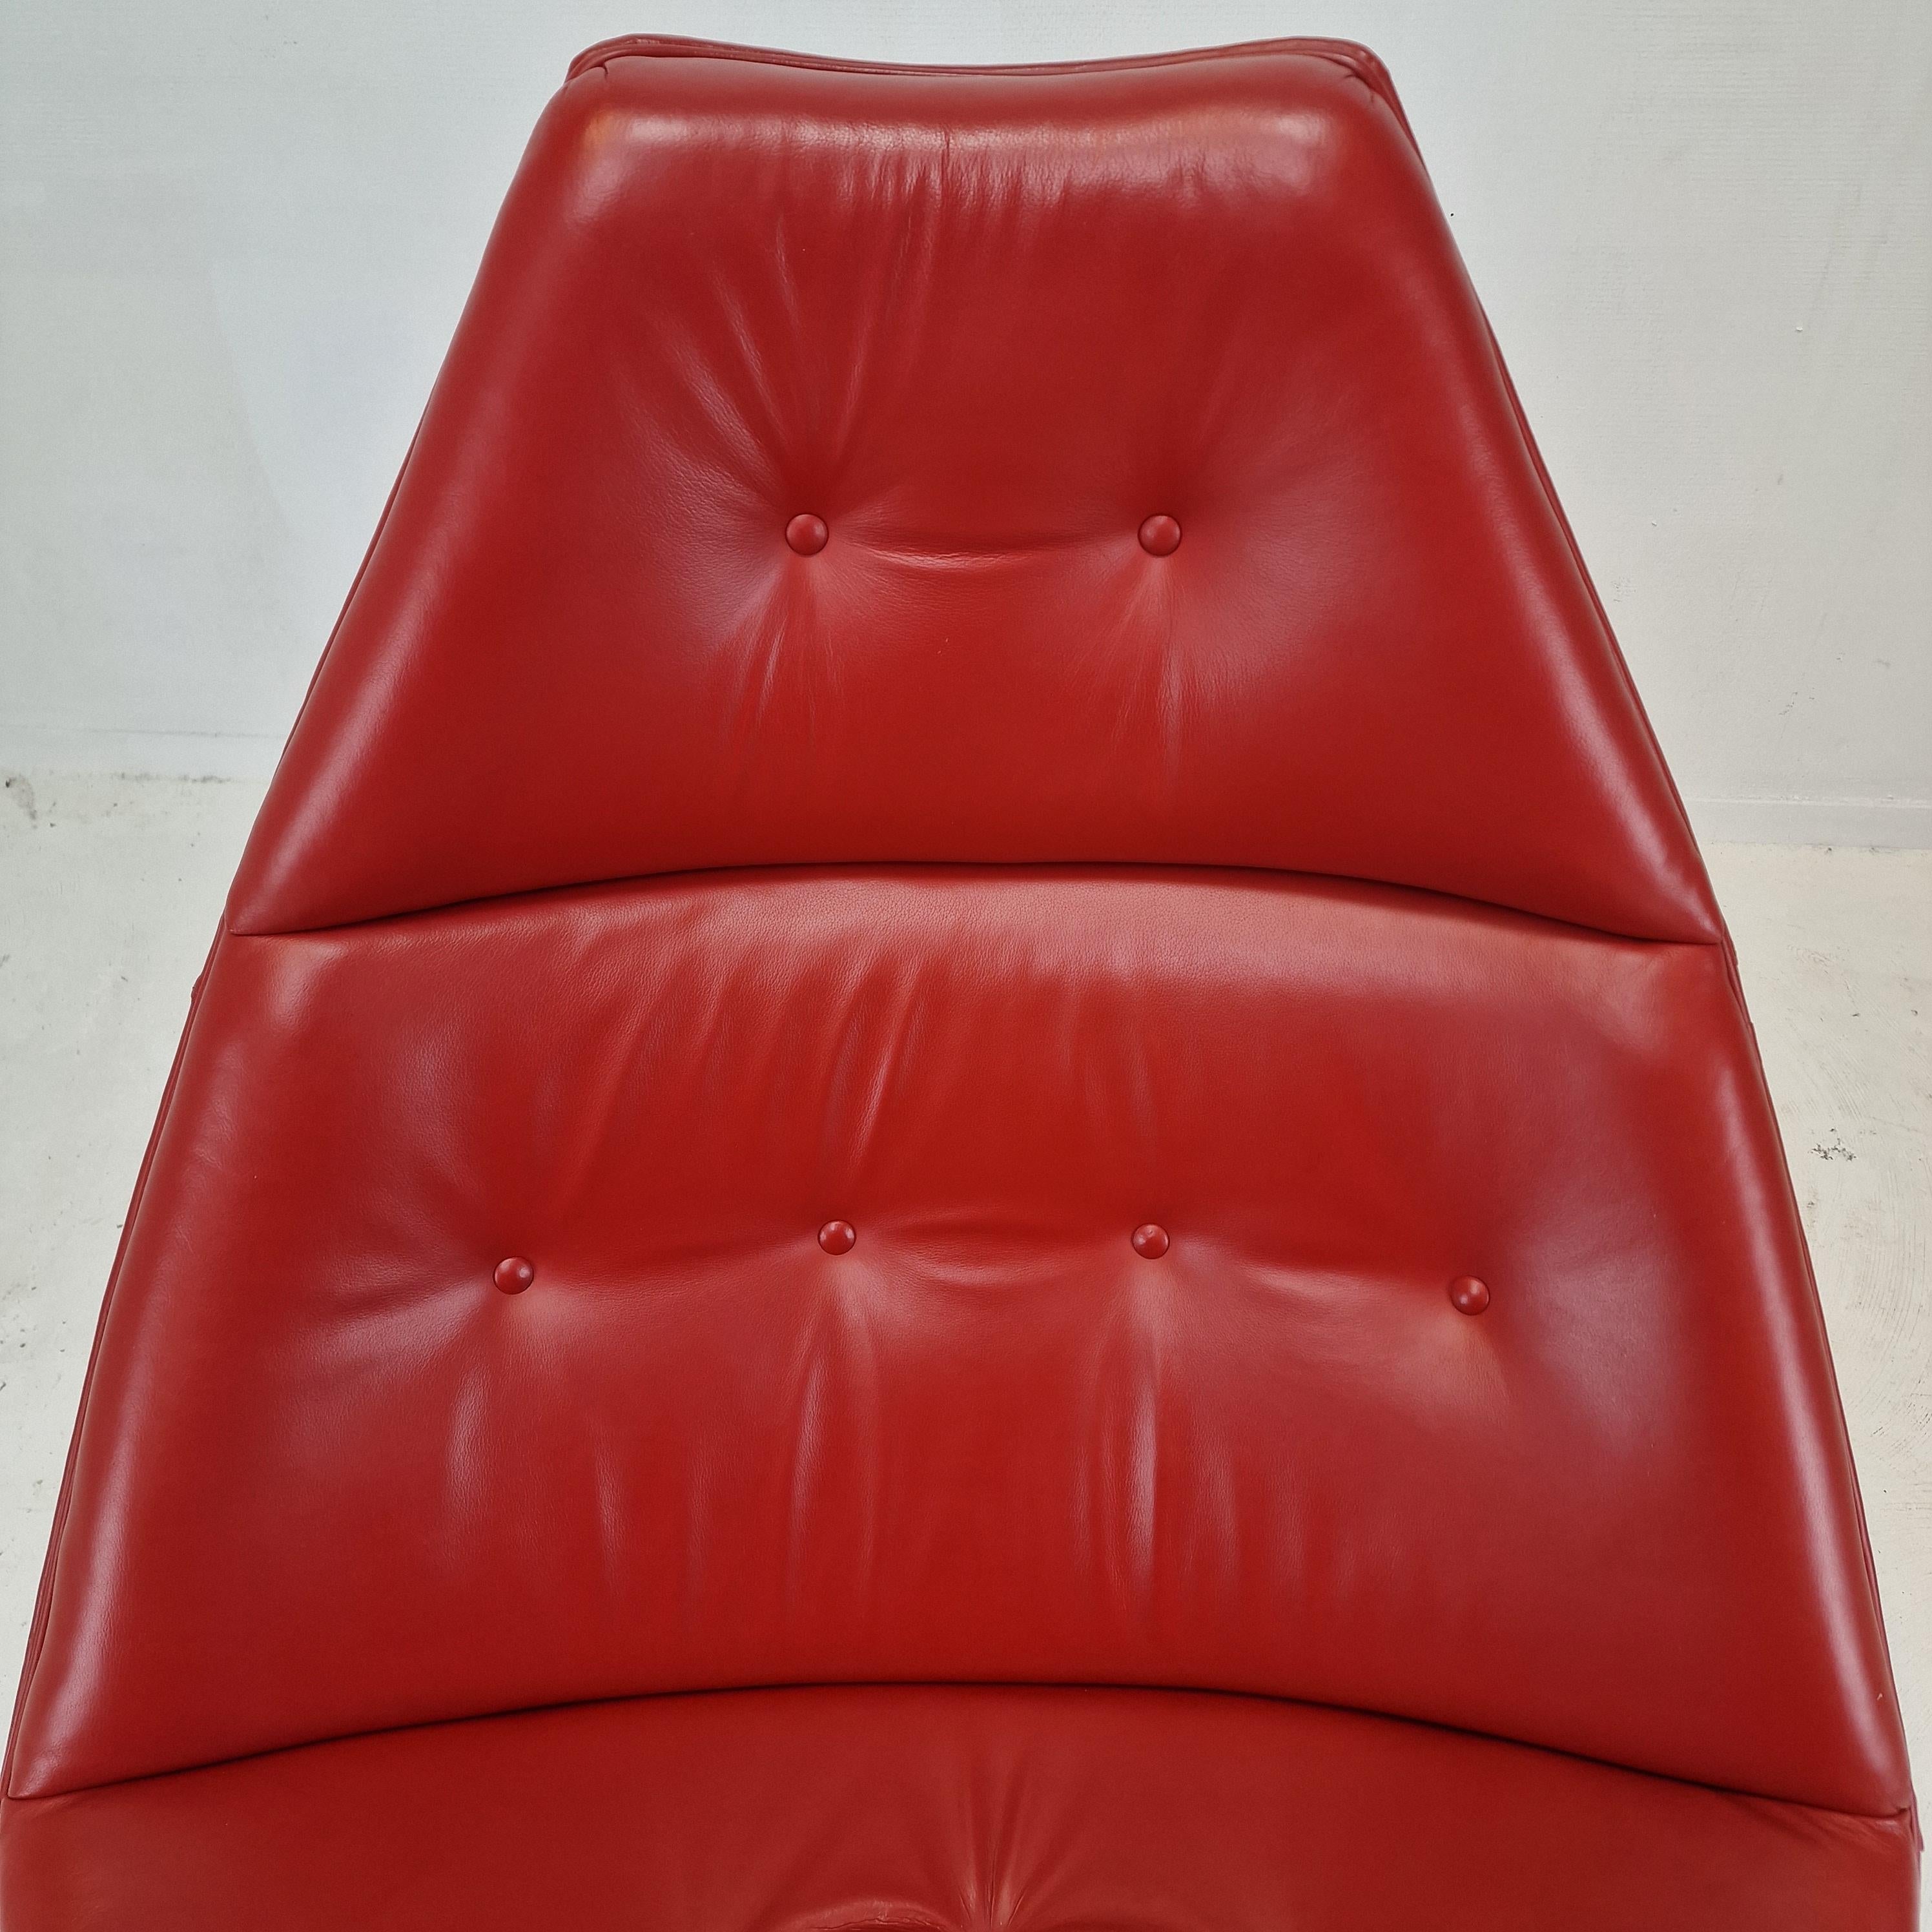 Midcentury F510 Lounge Chair by Geoffrey Harcourt for Artifort, 1970s For Sale 4